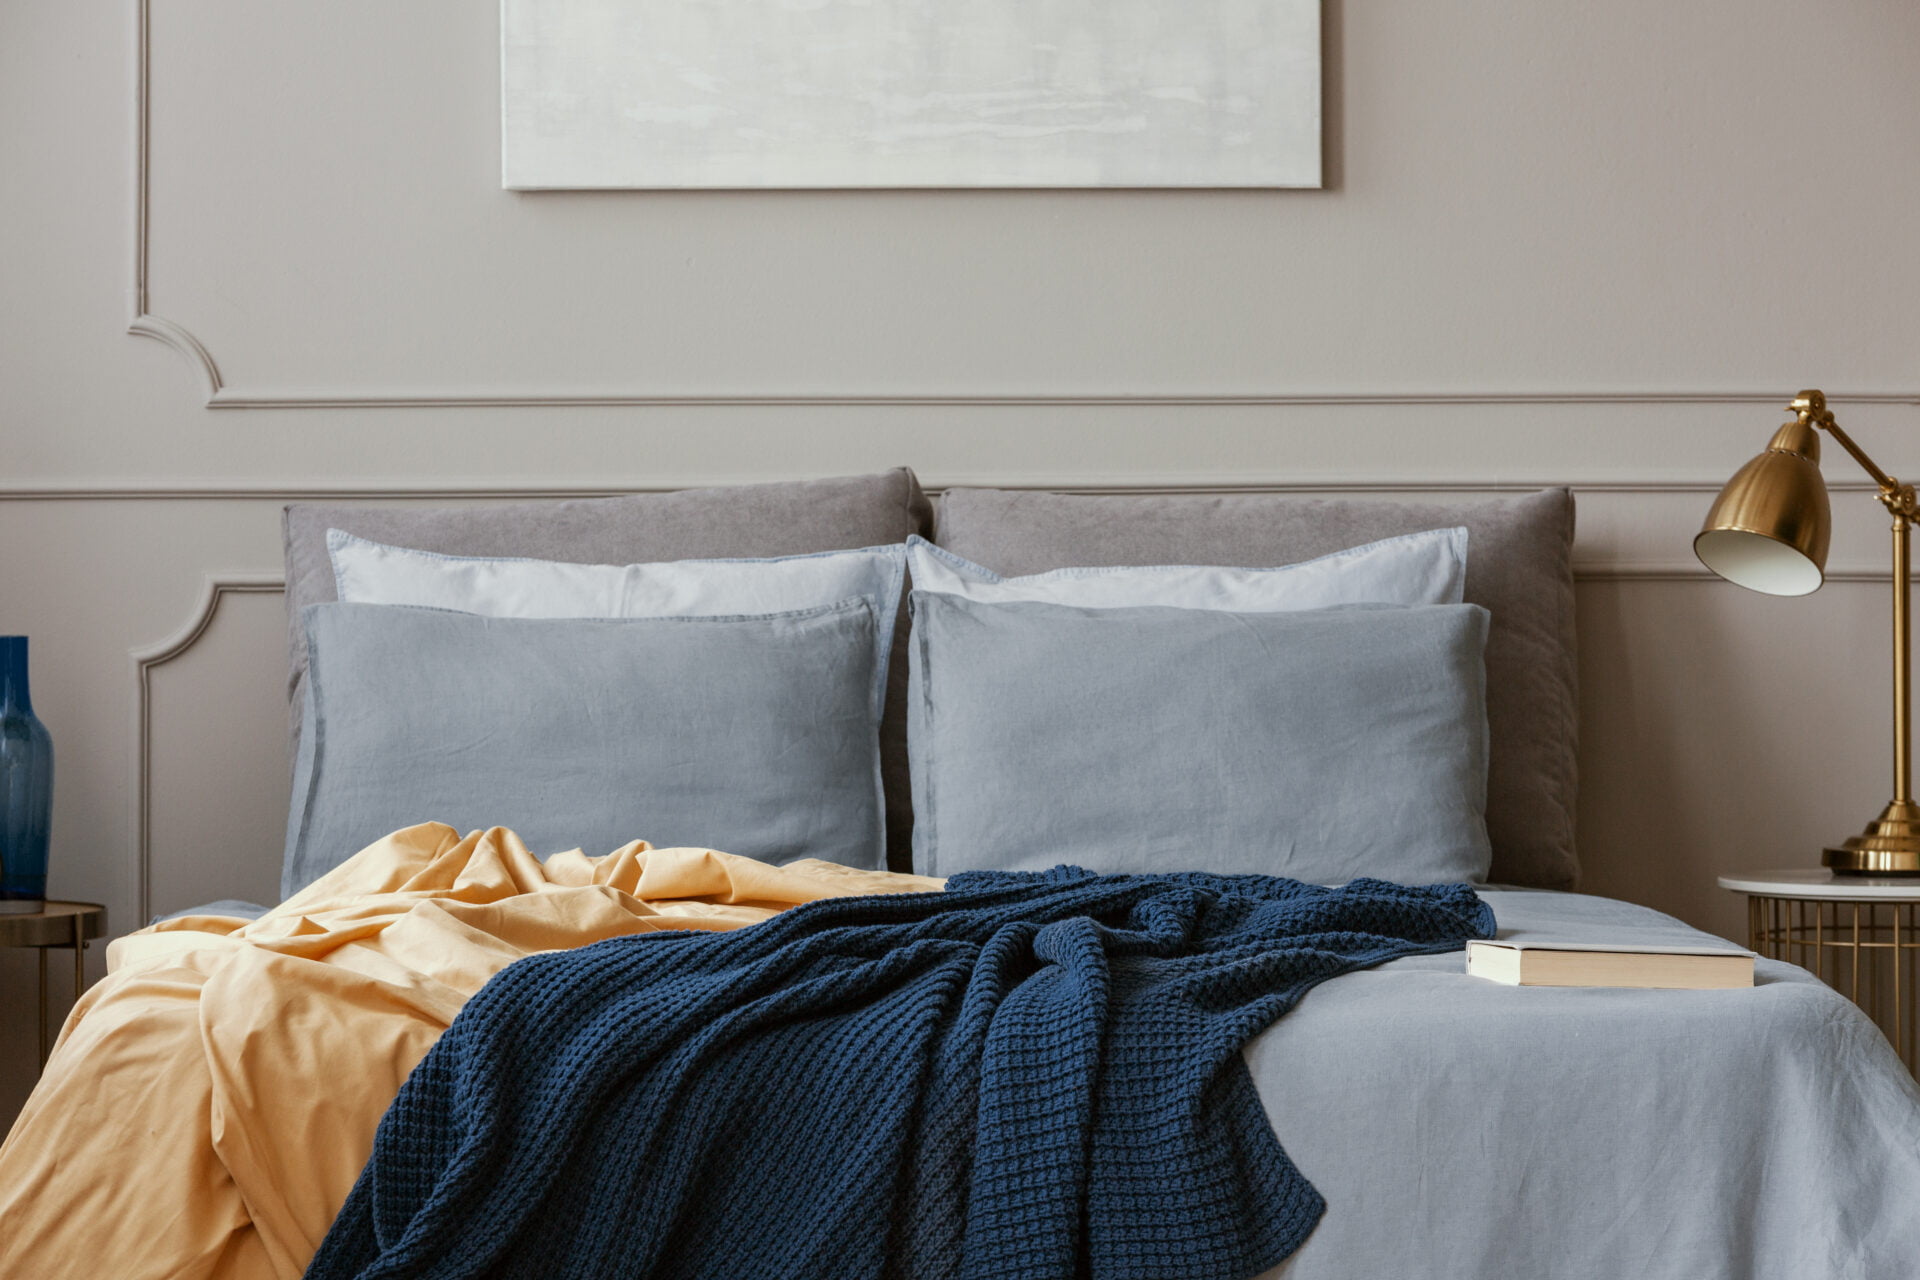 Dark blue and orange blankets on comfortable double bed in grey stylish bedroom